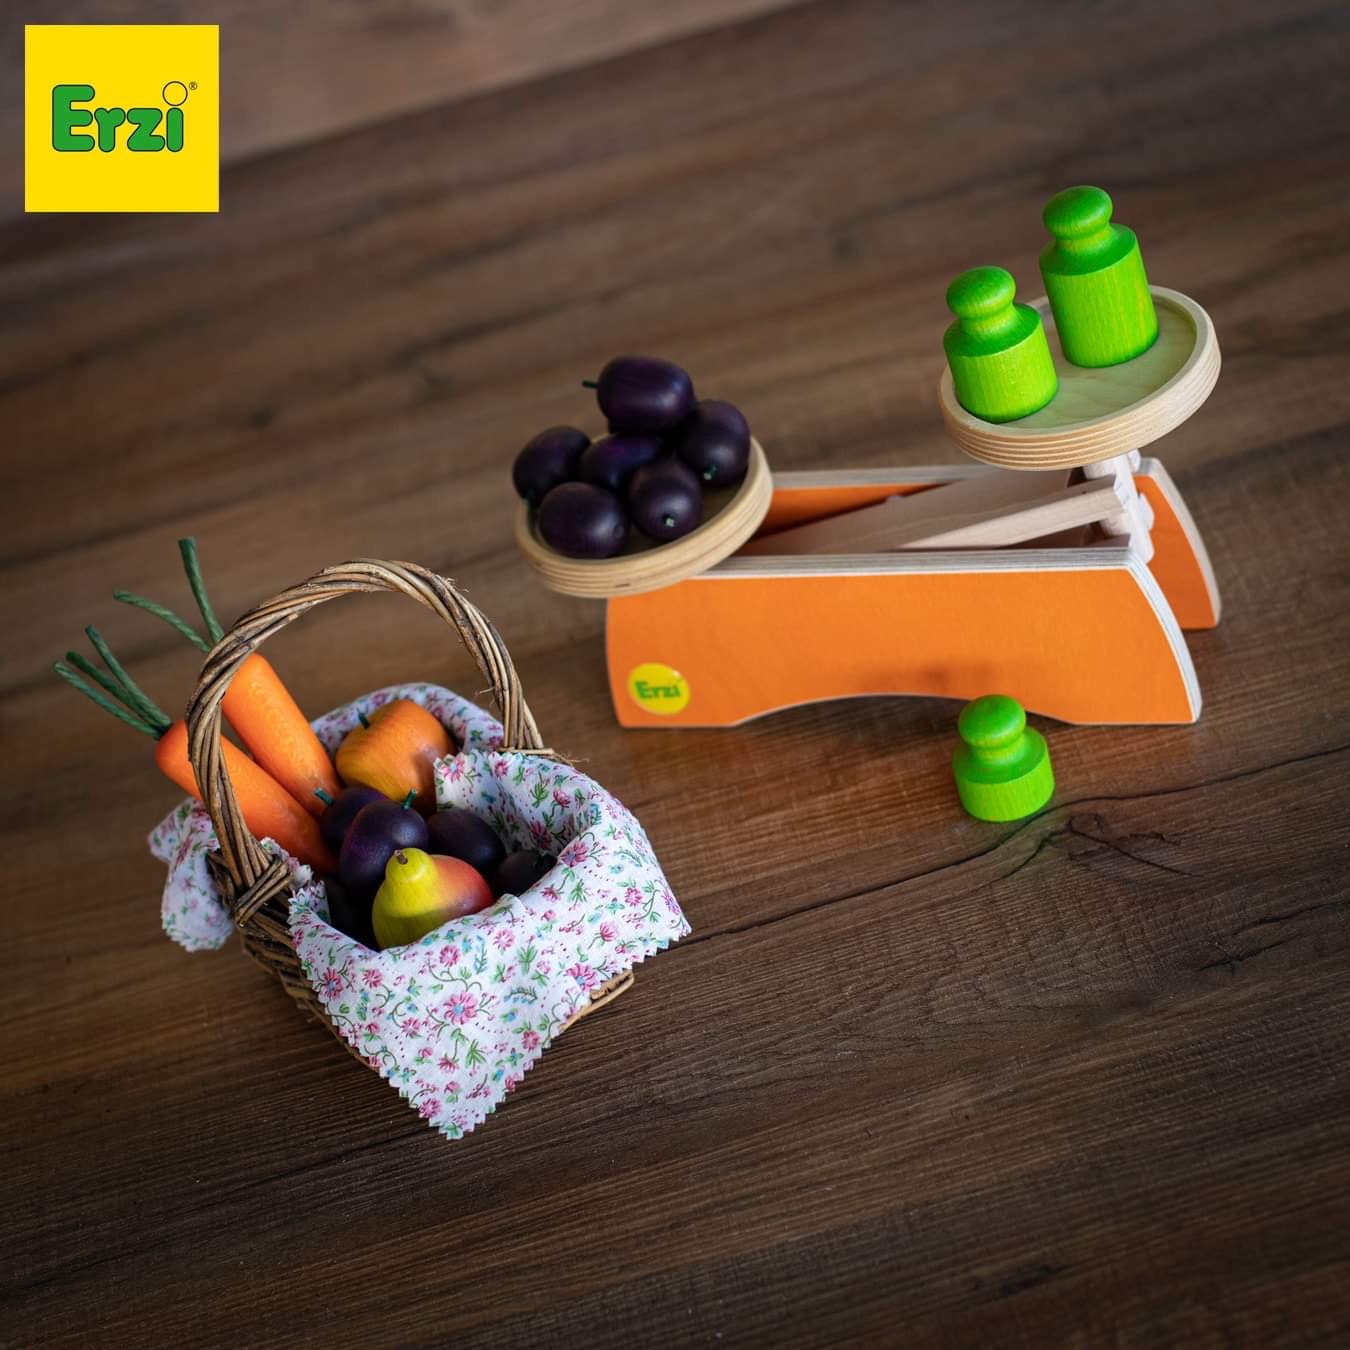 Erzi Scale - Play Food Made in Germany - Wood Wood Toys Canada's Favourite Montessori Toy Store